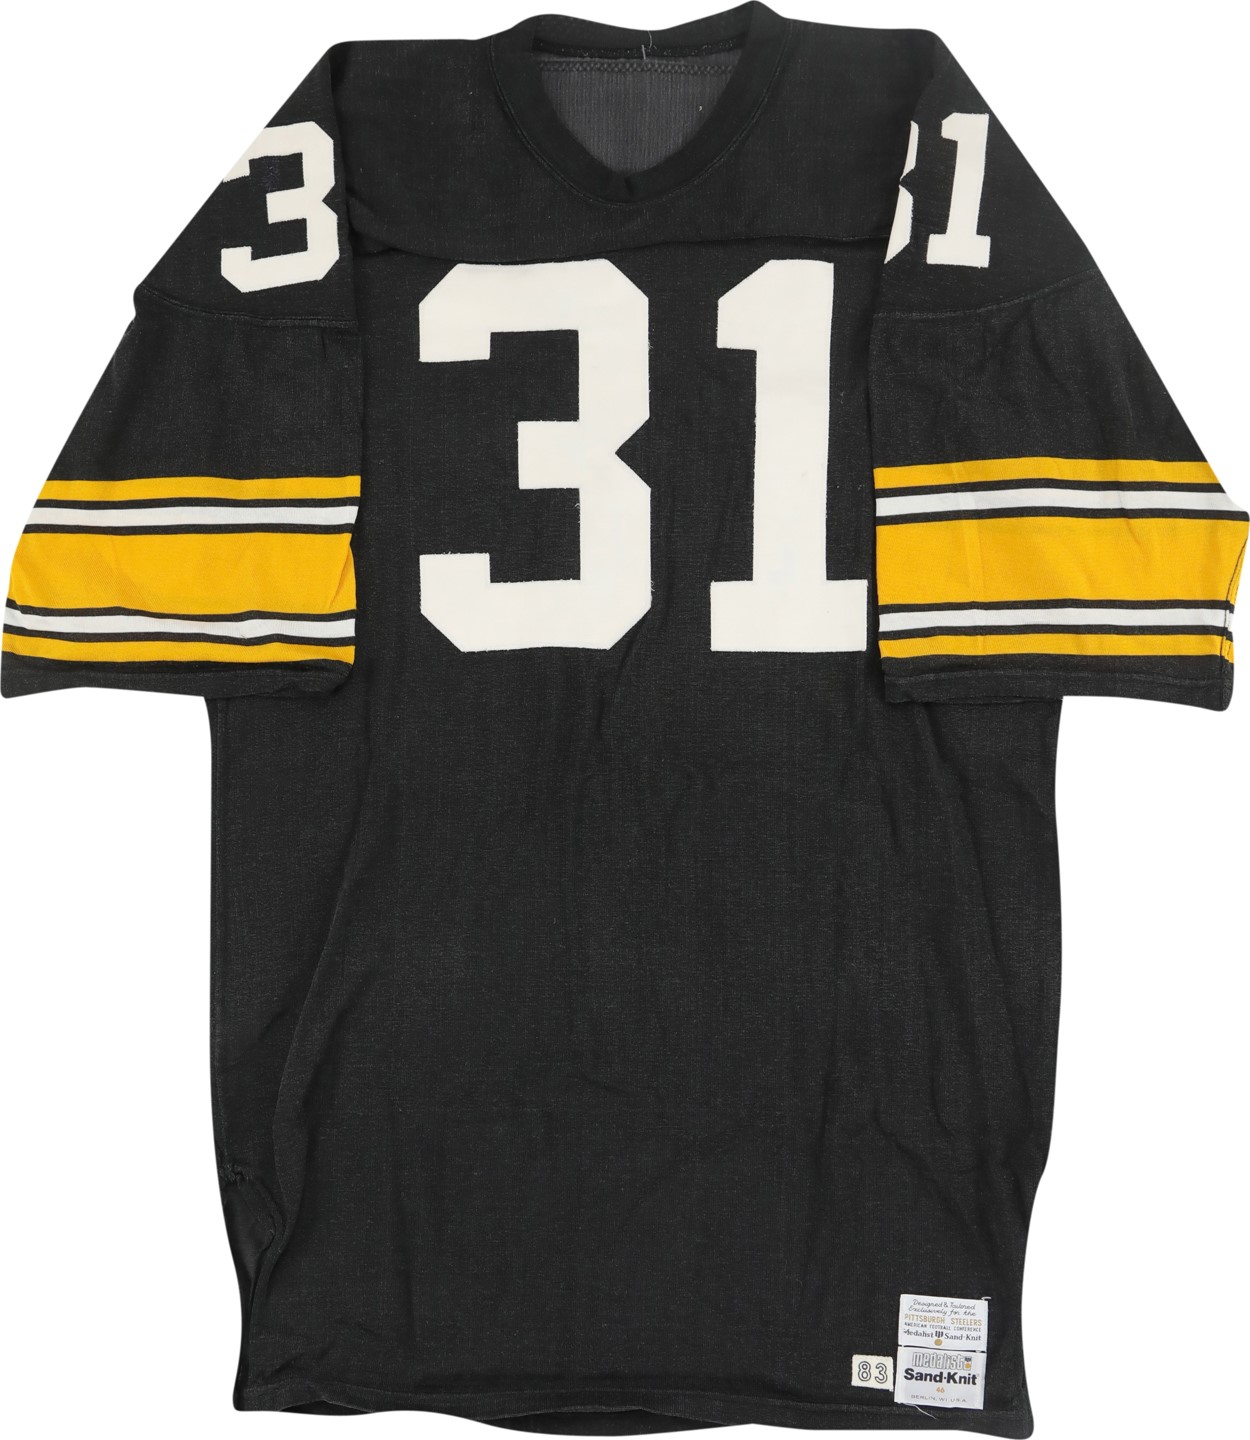 1983 Donnie Shell Pittsburgh Steelers Game Worn Jersey (Photo-Matched)